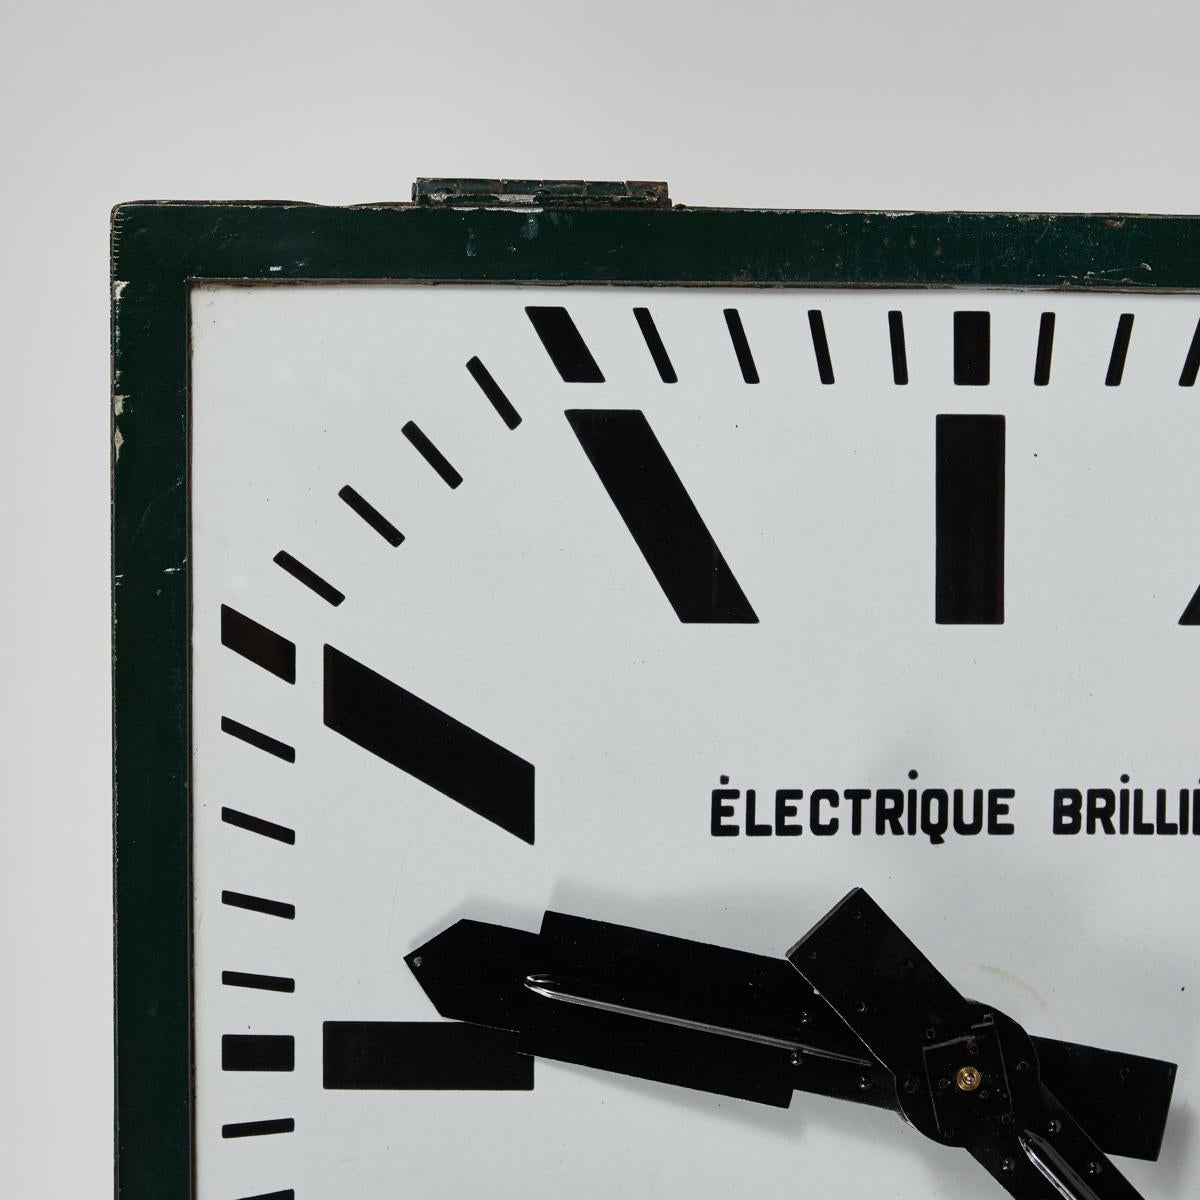 Decorative French turn-of-the-century industrial green metal clock manufactured and designed by renowned clock-smith Électrique Brillé. Featuring with a white and black enameled clock-face with graphic typeface lettering. The bold yet minimalist